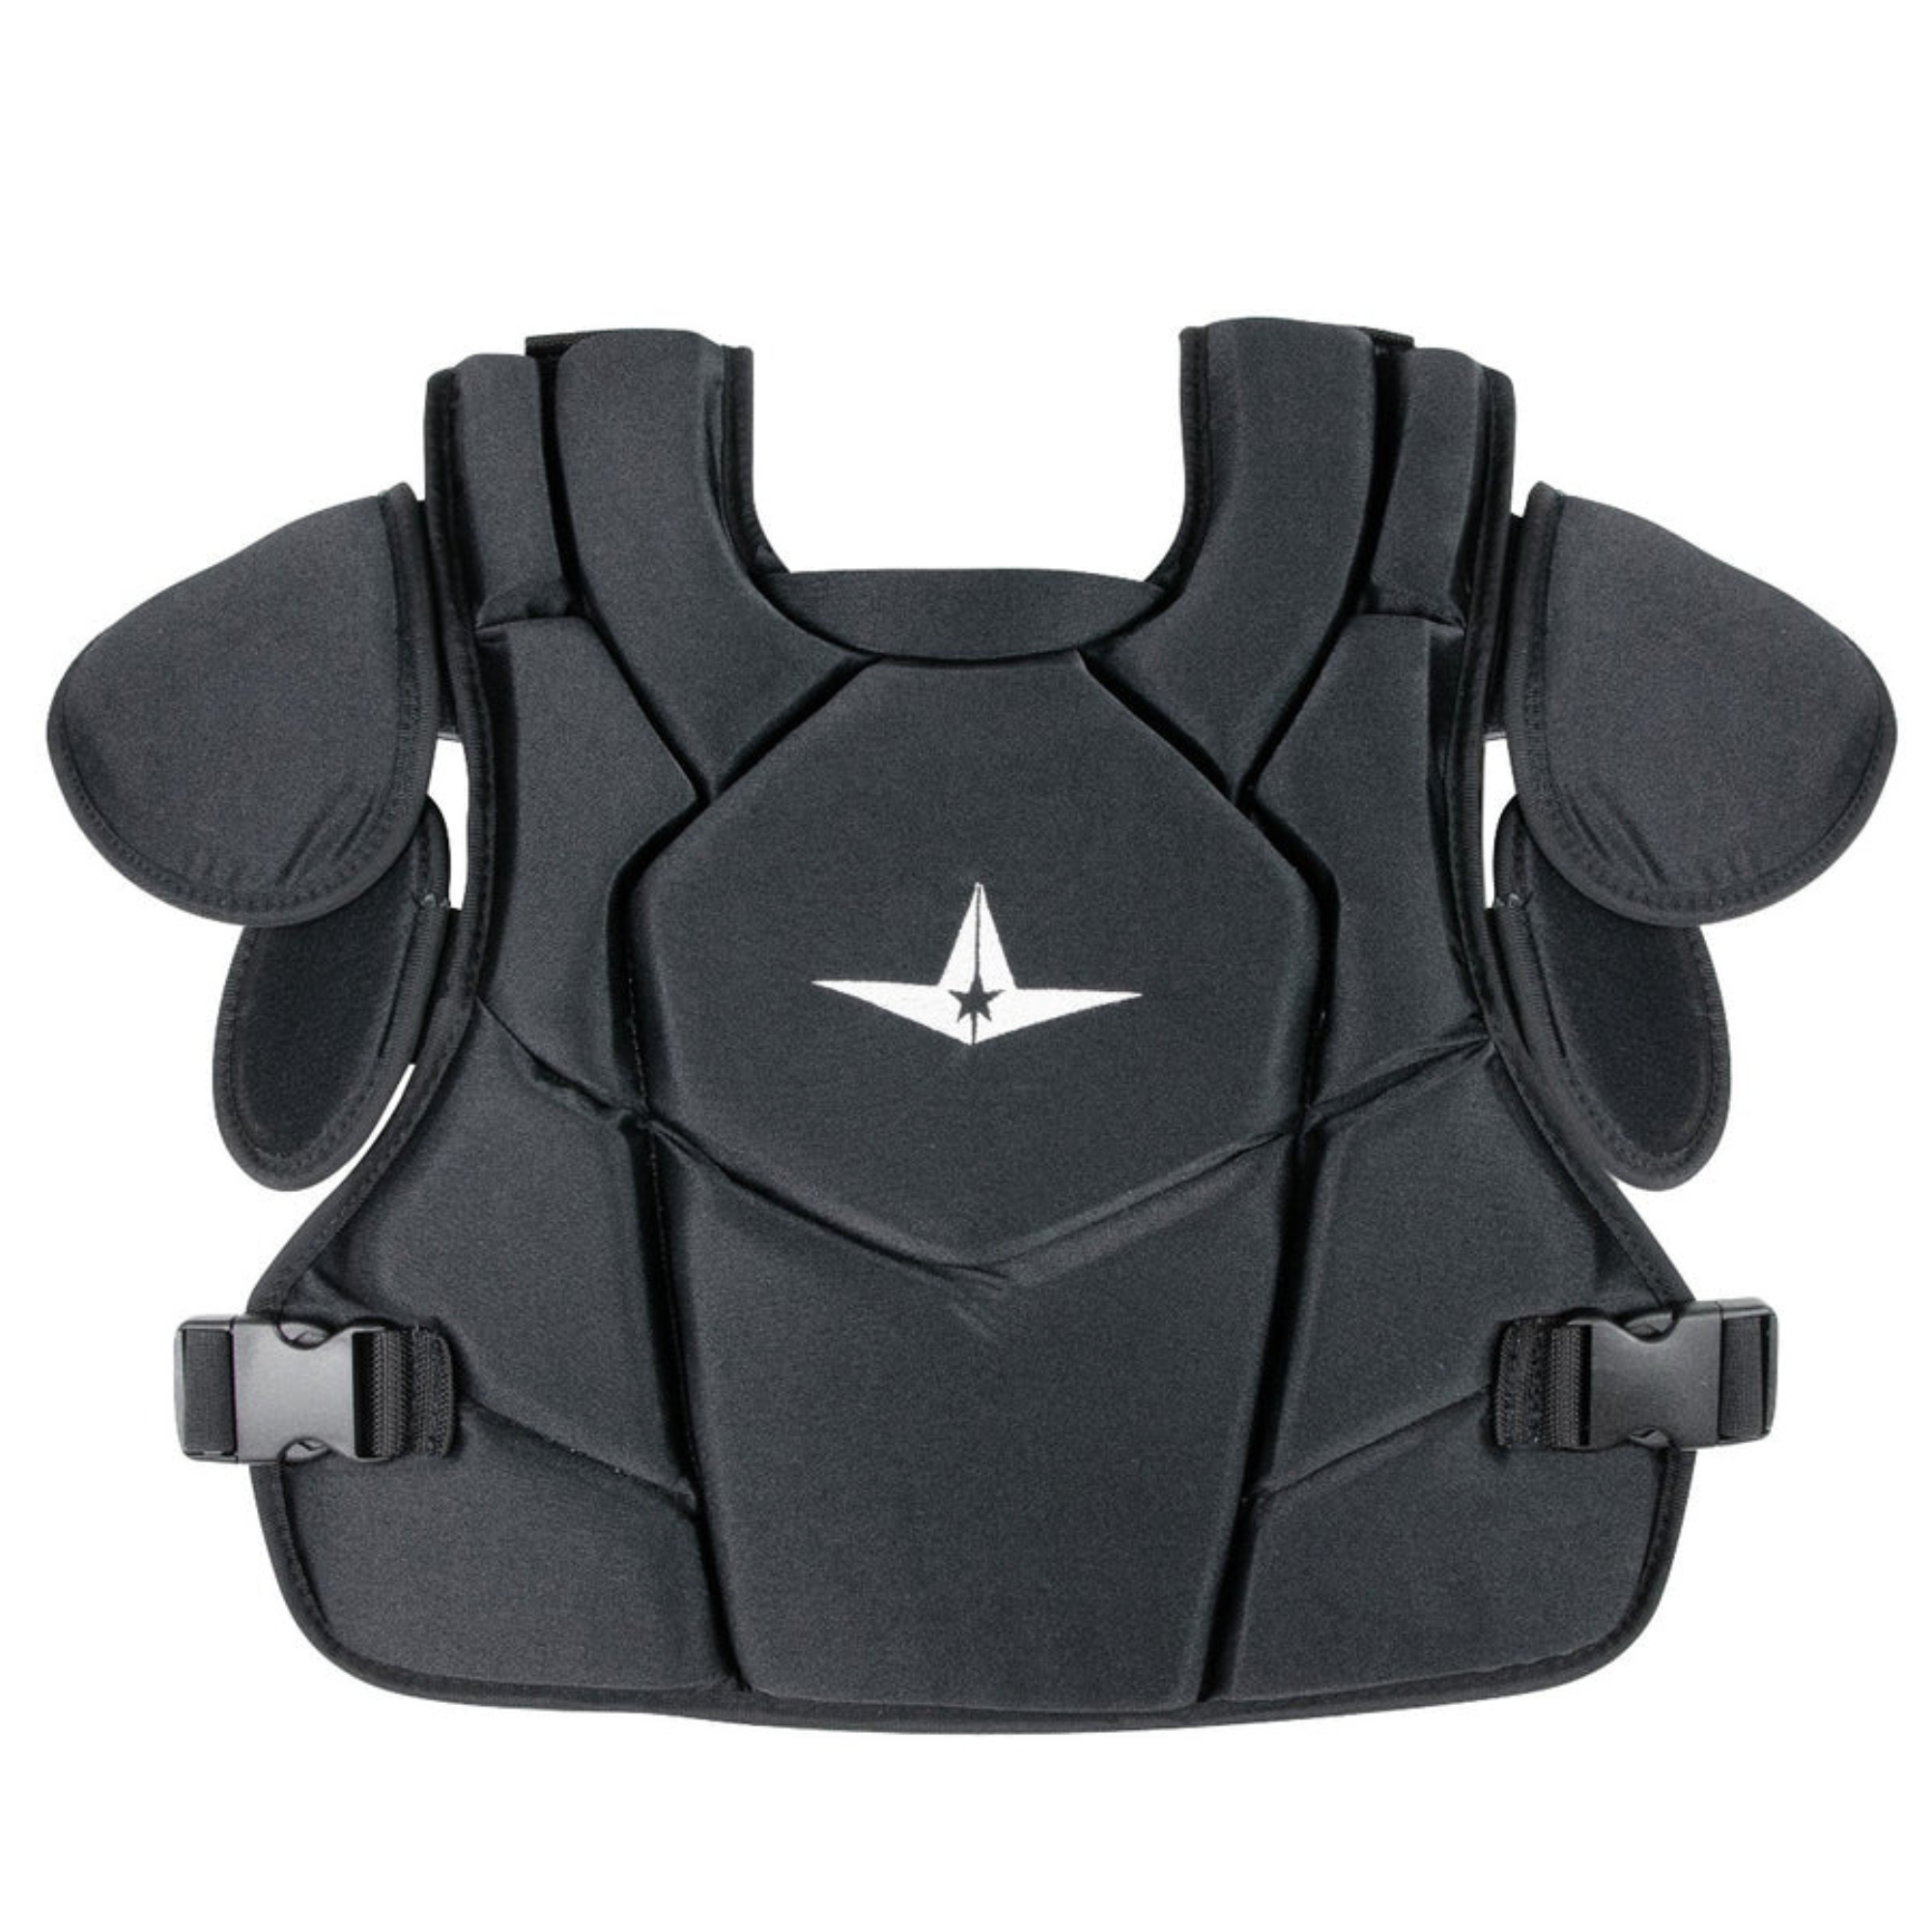 All-Star Pro Internal Shell Umpire Chest Protector / 13"